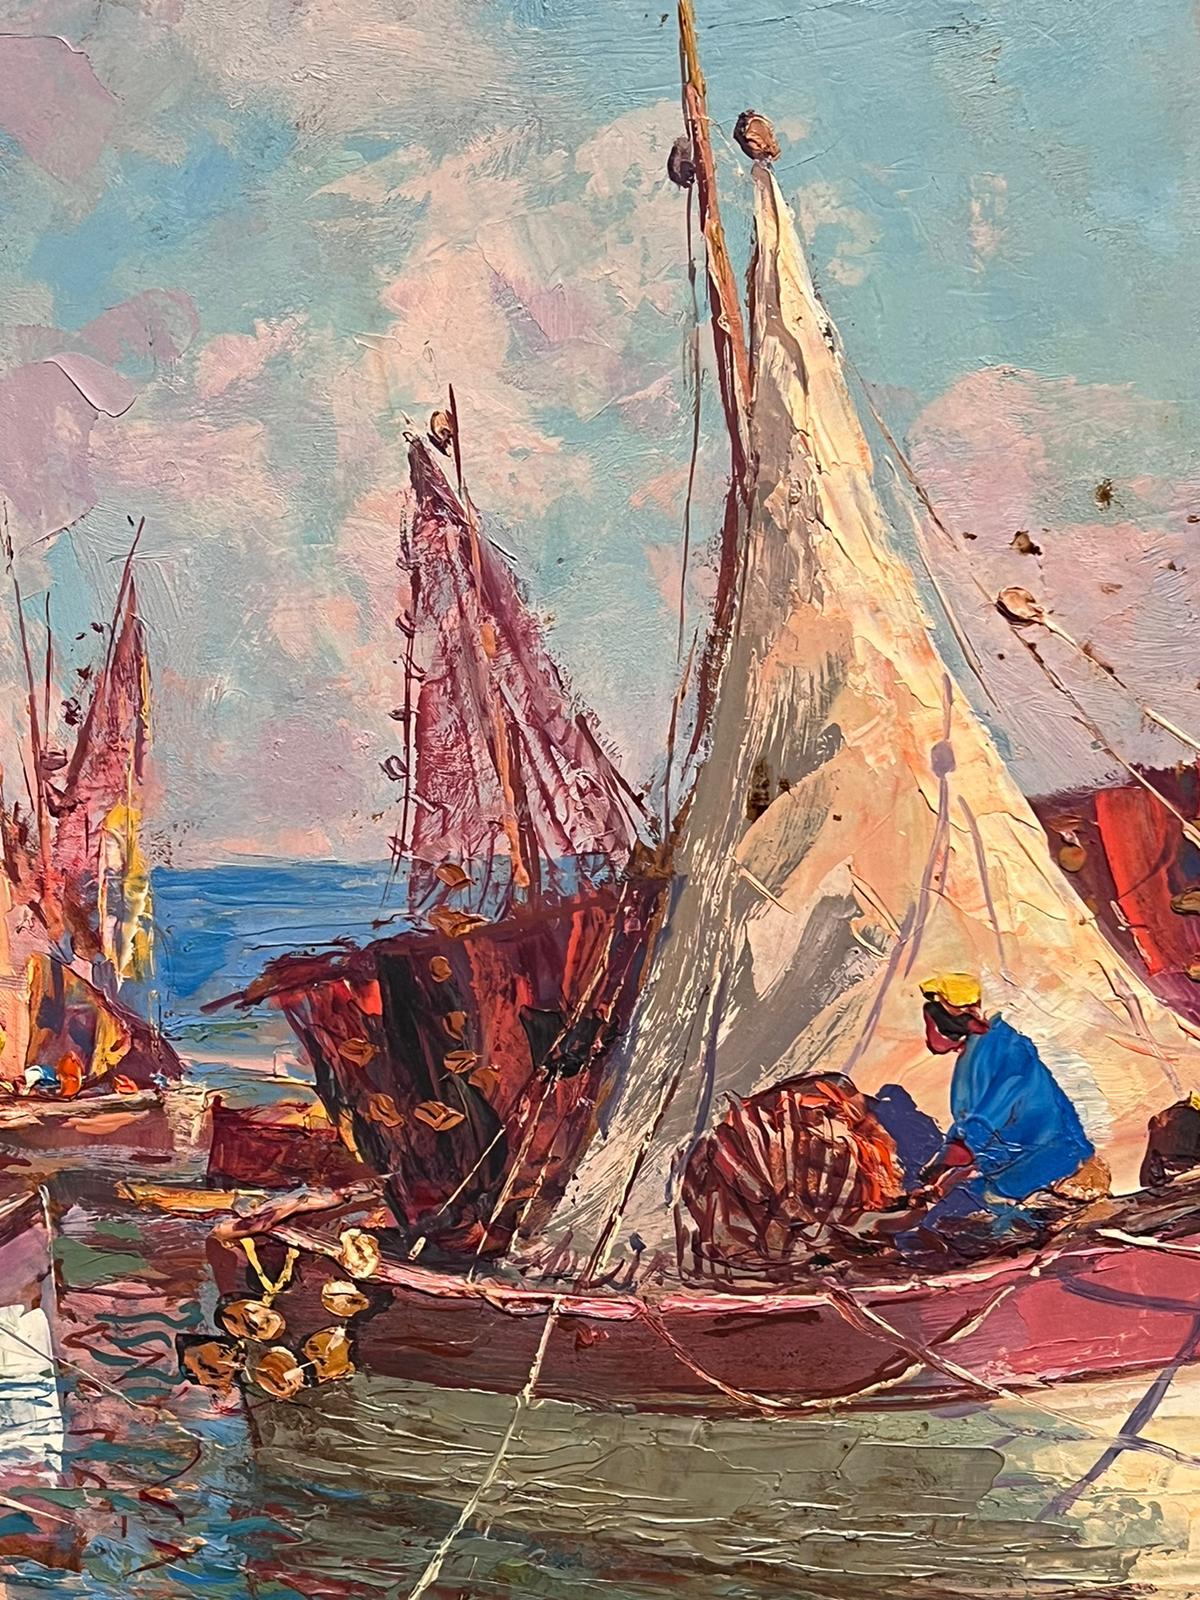 Artist/ School: Pierre Forest (1881-1971), signed to the boat

Title: St. Tropez

Medium:  oil on board, unframed

Size:

board: 19.5 x 39.5 inches

Provenance: private collection, France

Condition: The painting is in overall very good and sound